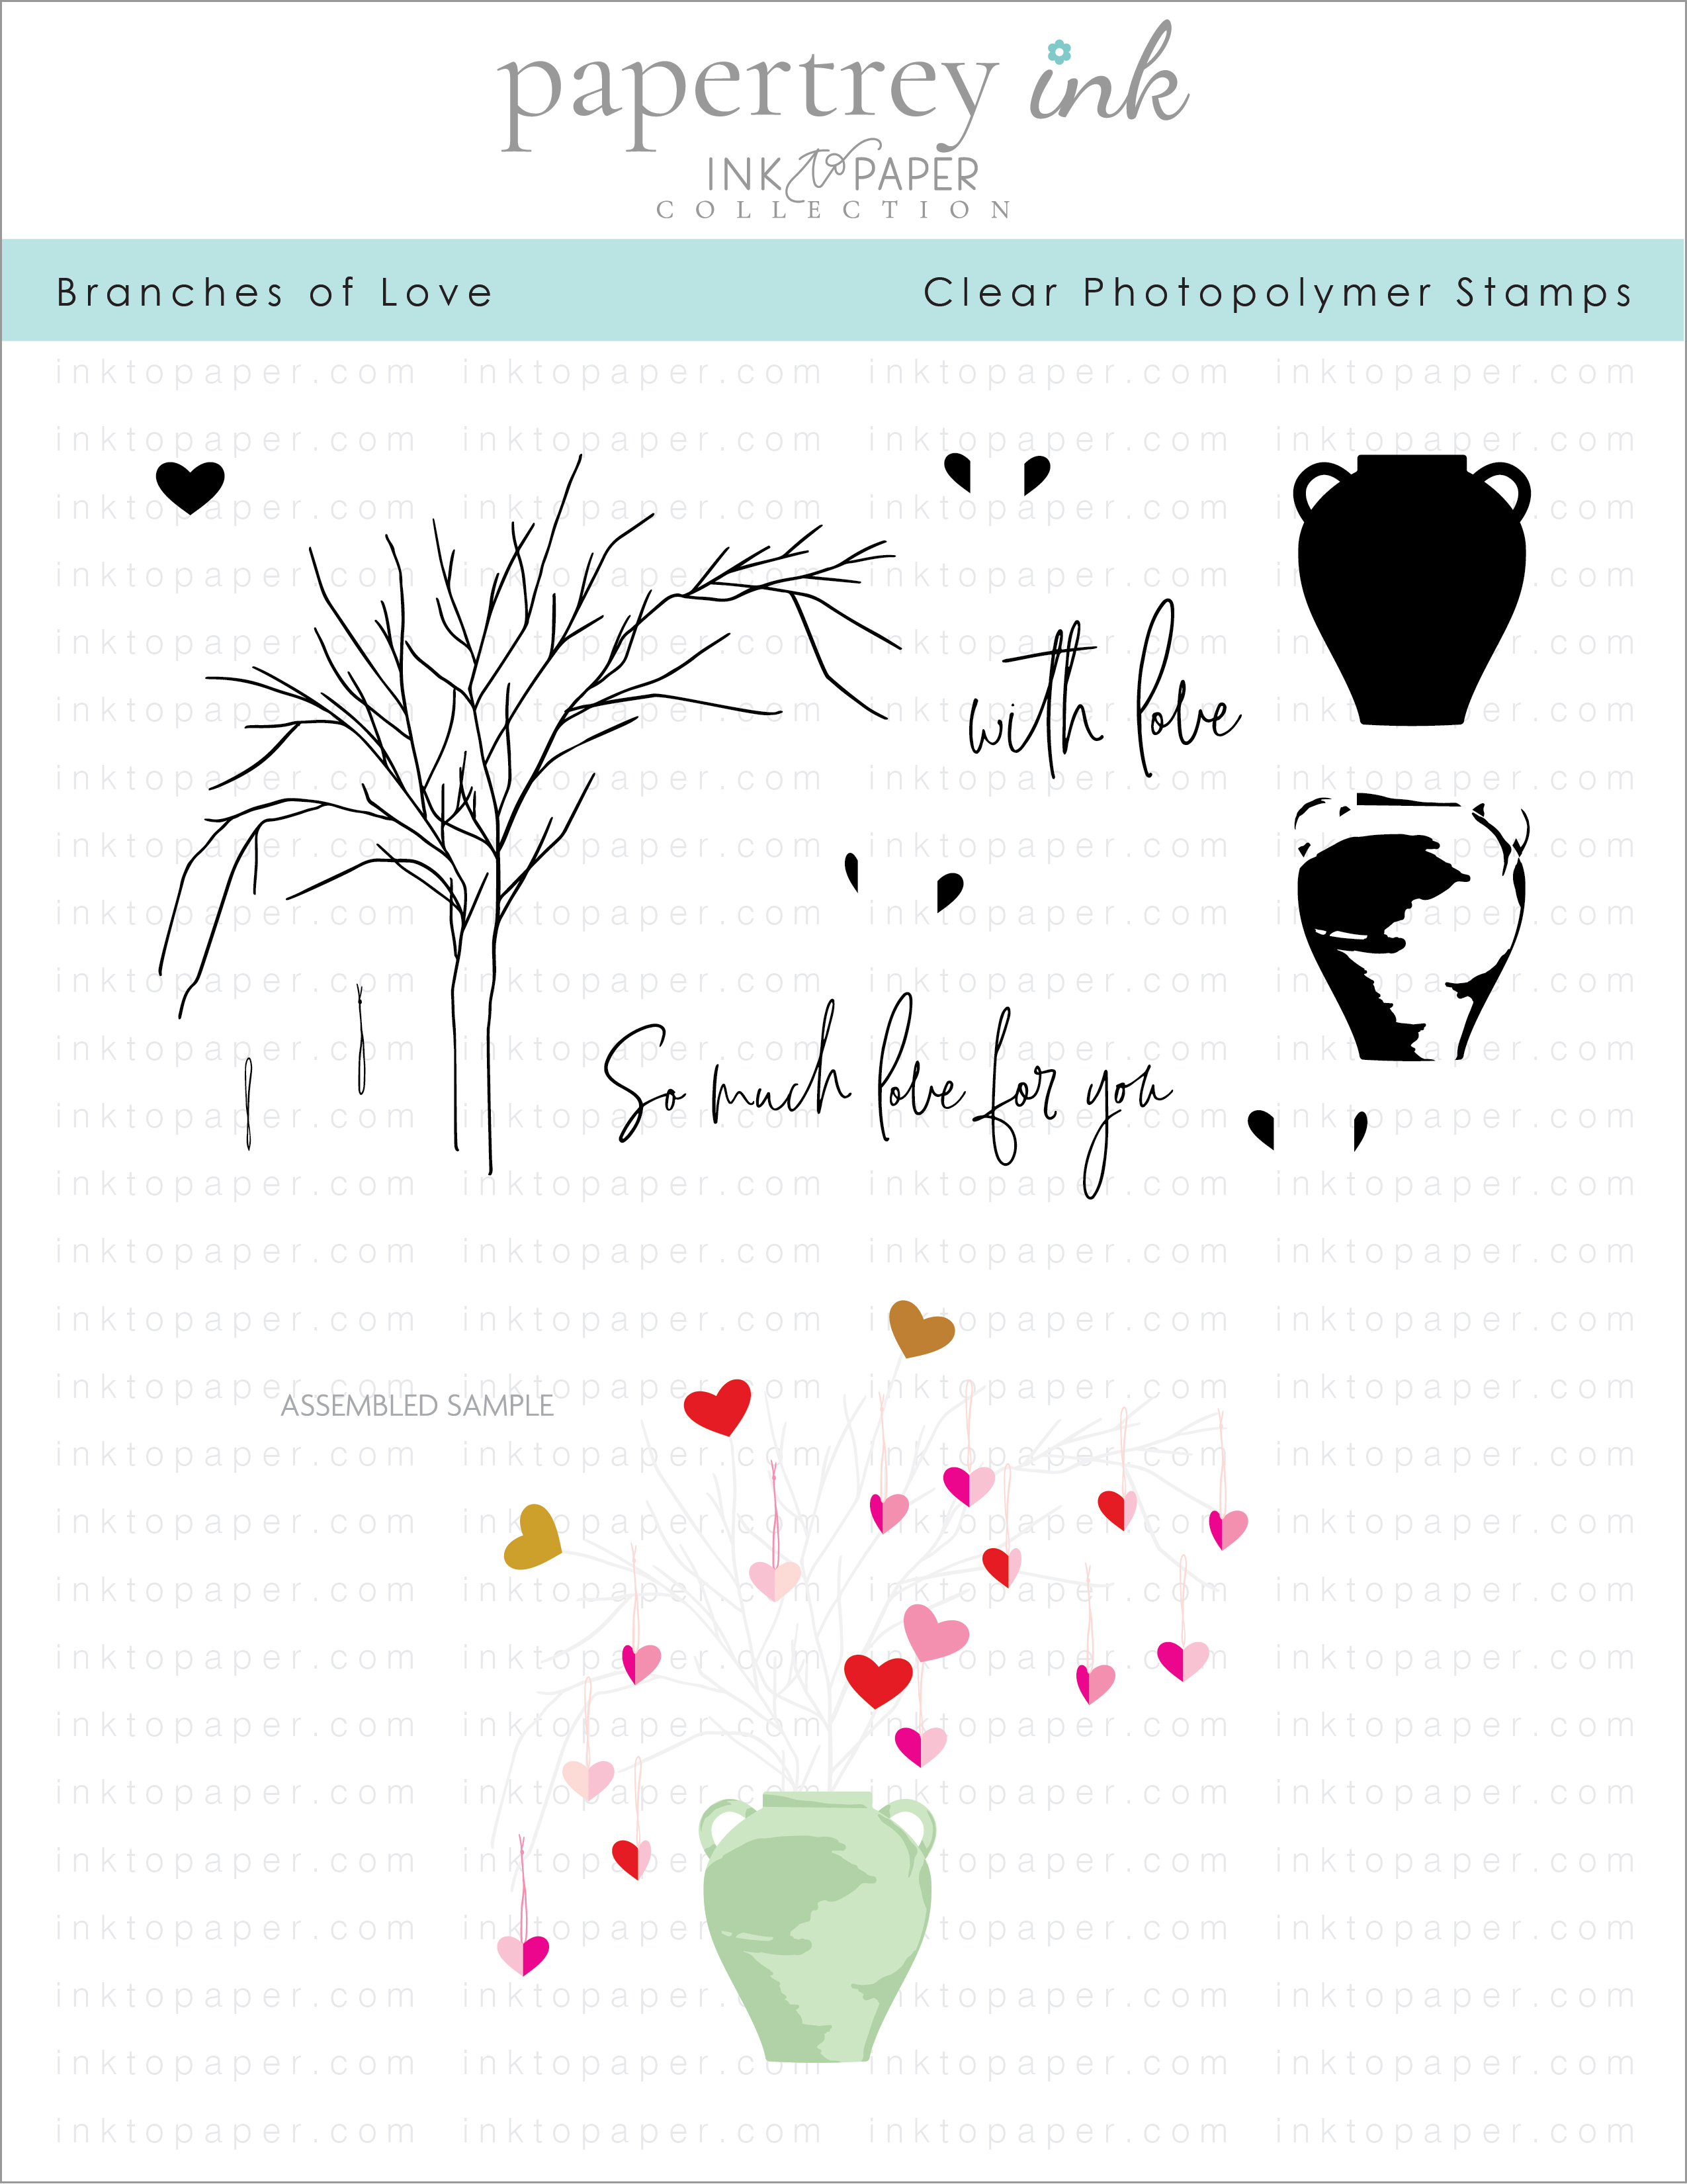 Branches of Love Stamp Set: Papertrey Ink